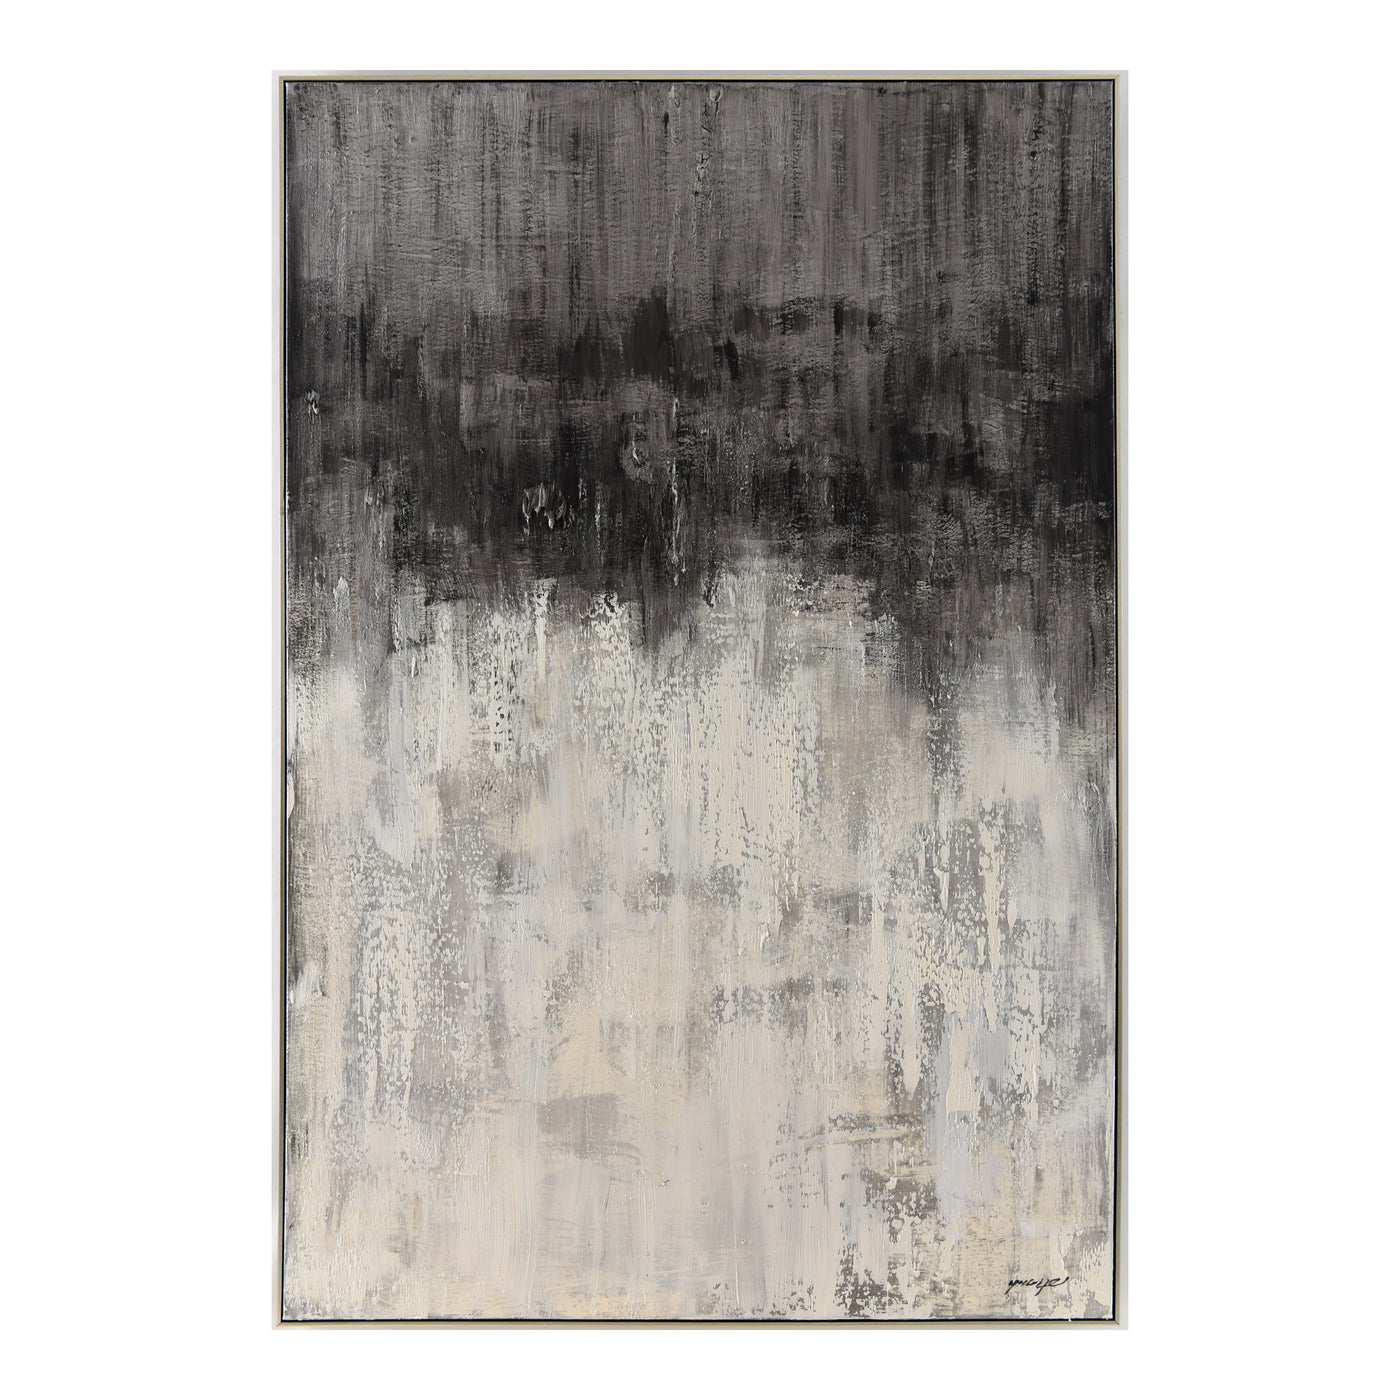 The Eventide Wall Decor is the perfect piece to any minimalist home. A rough, unfinished feel gives this piece an artsy, e...